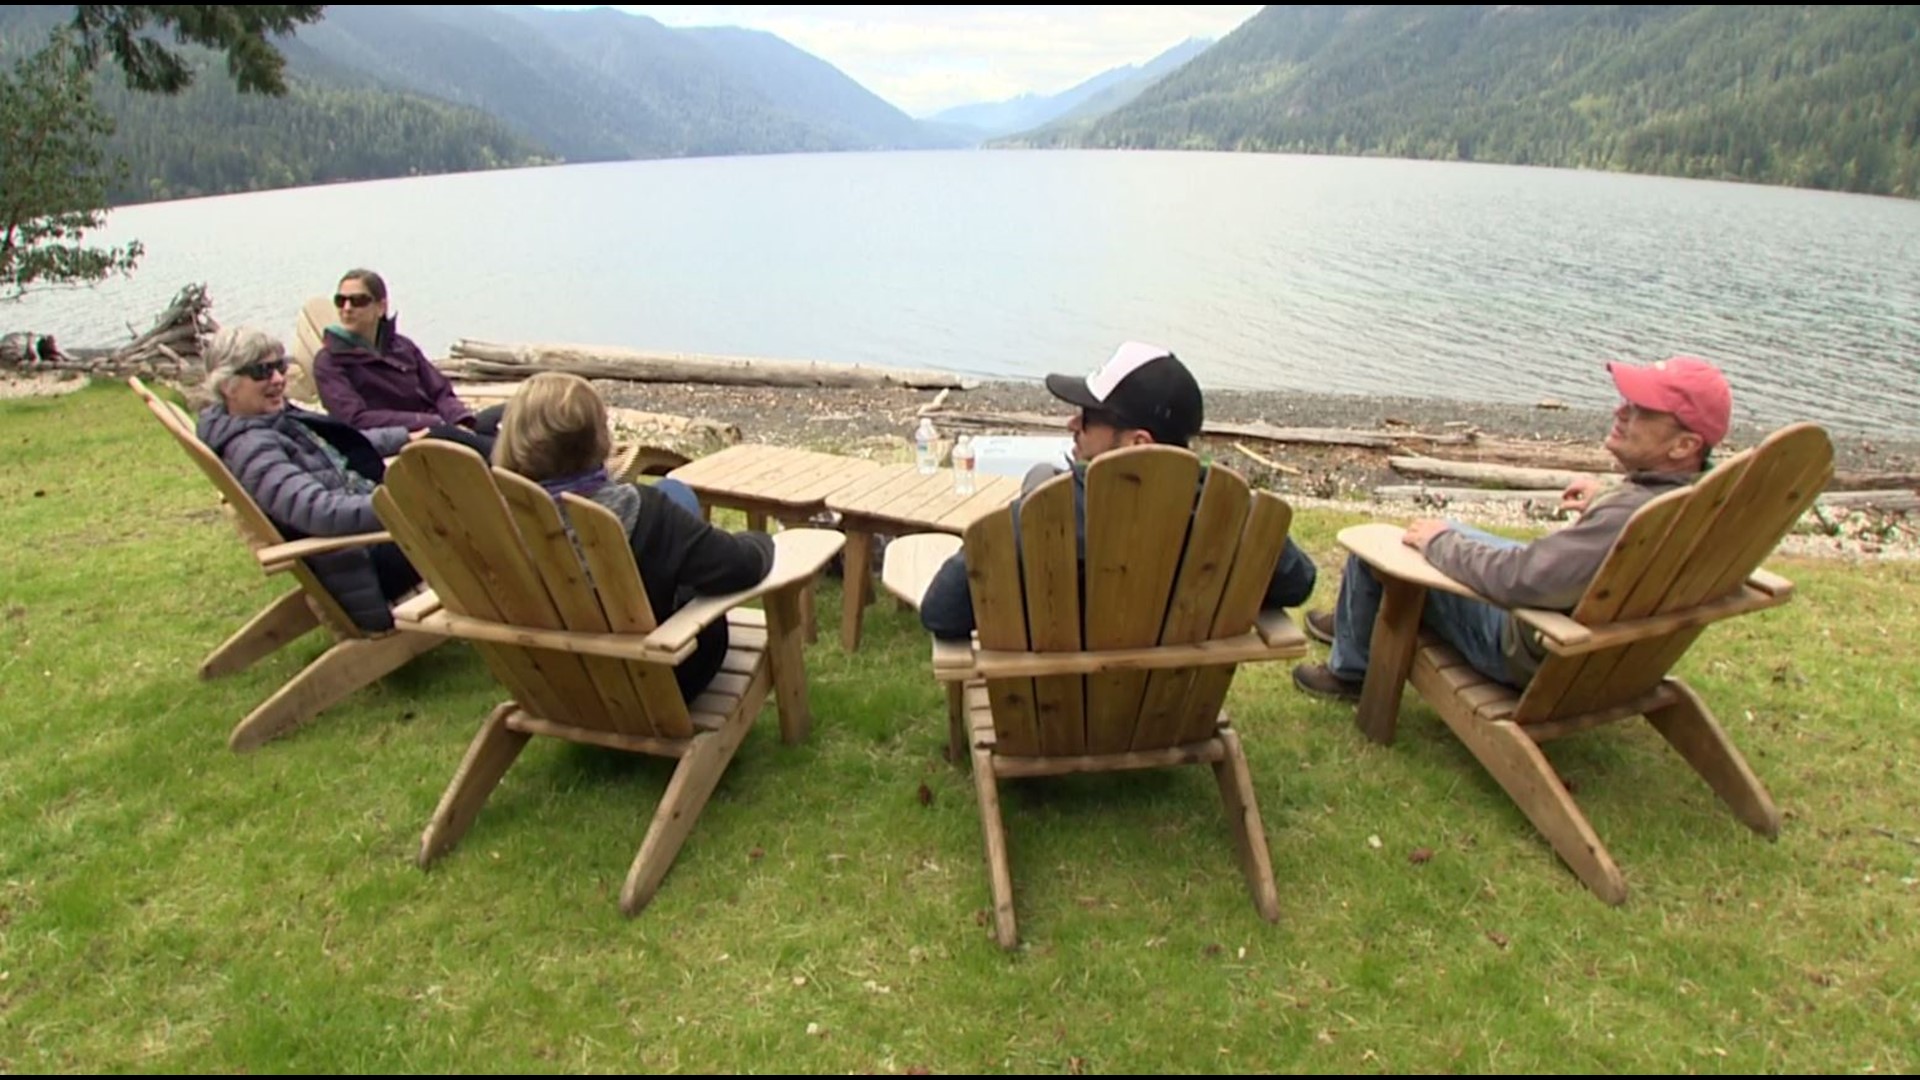 Renting a cabin at the historic Lake Crescent Lodge is ideal, but there are many reasons to visit the lake, including the fact that it’s free. Lake Crescent is 2019’s Best Free Adventure.